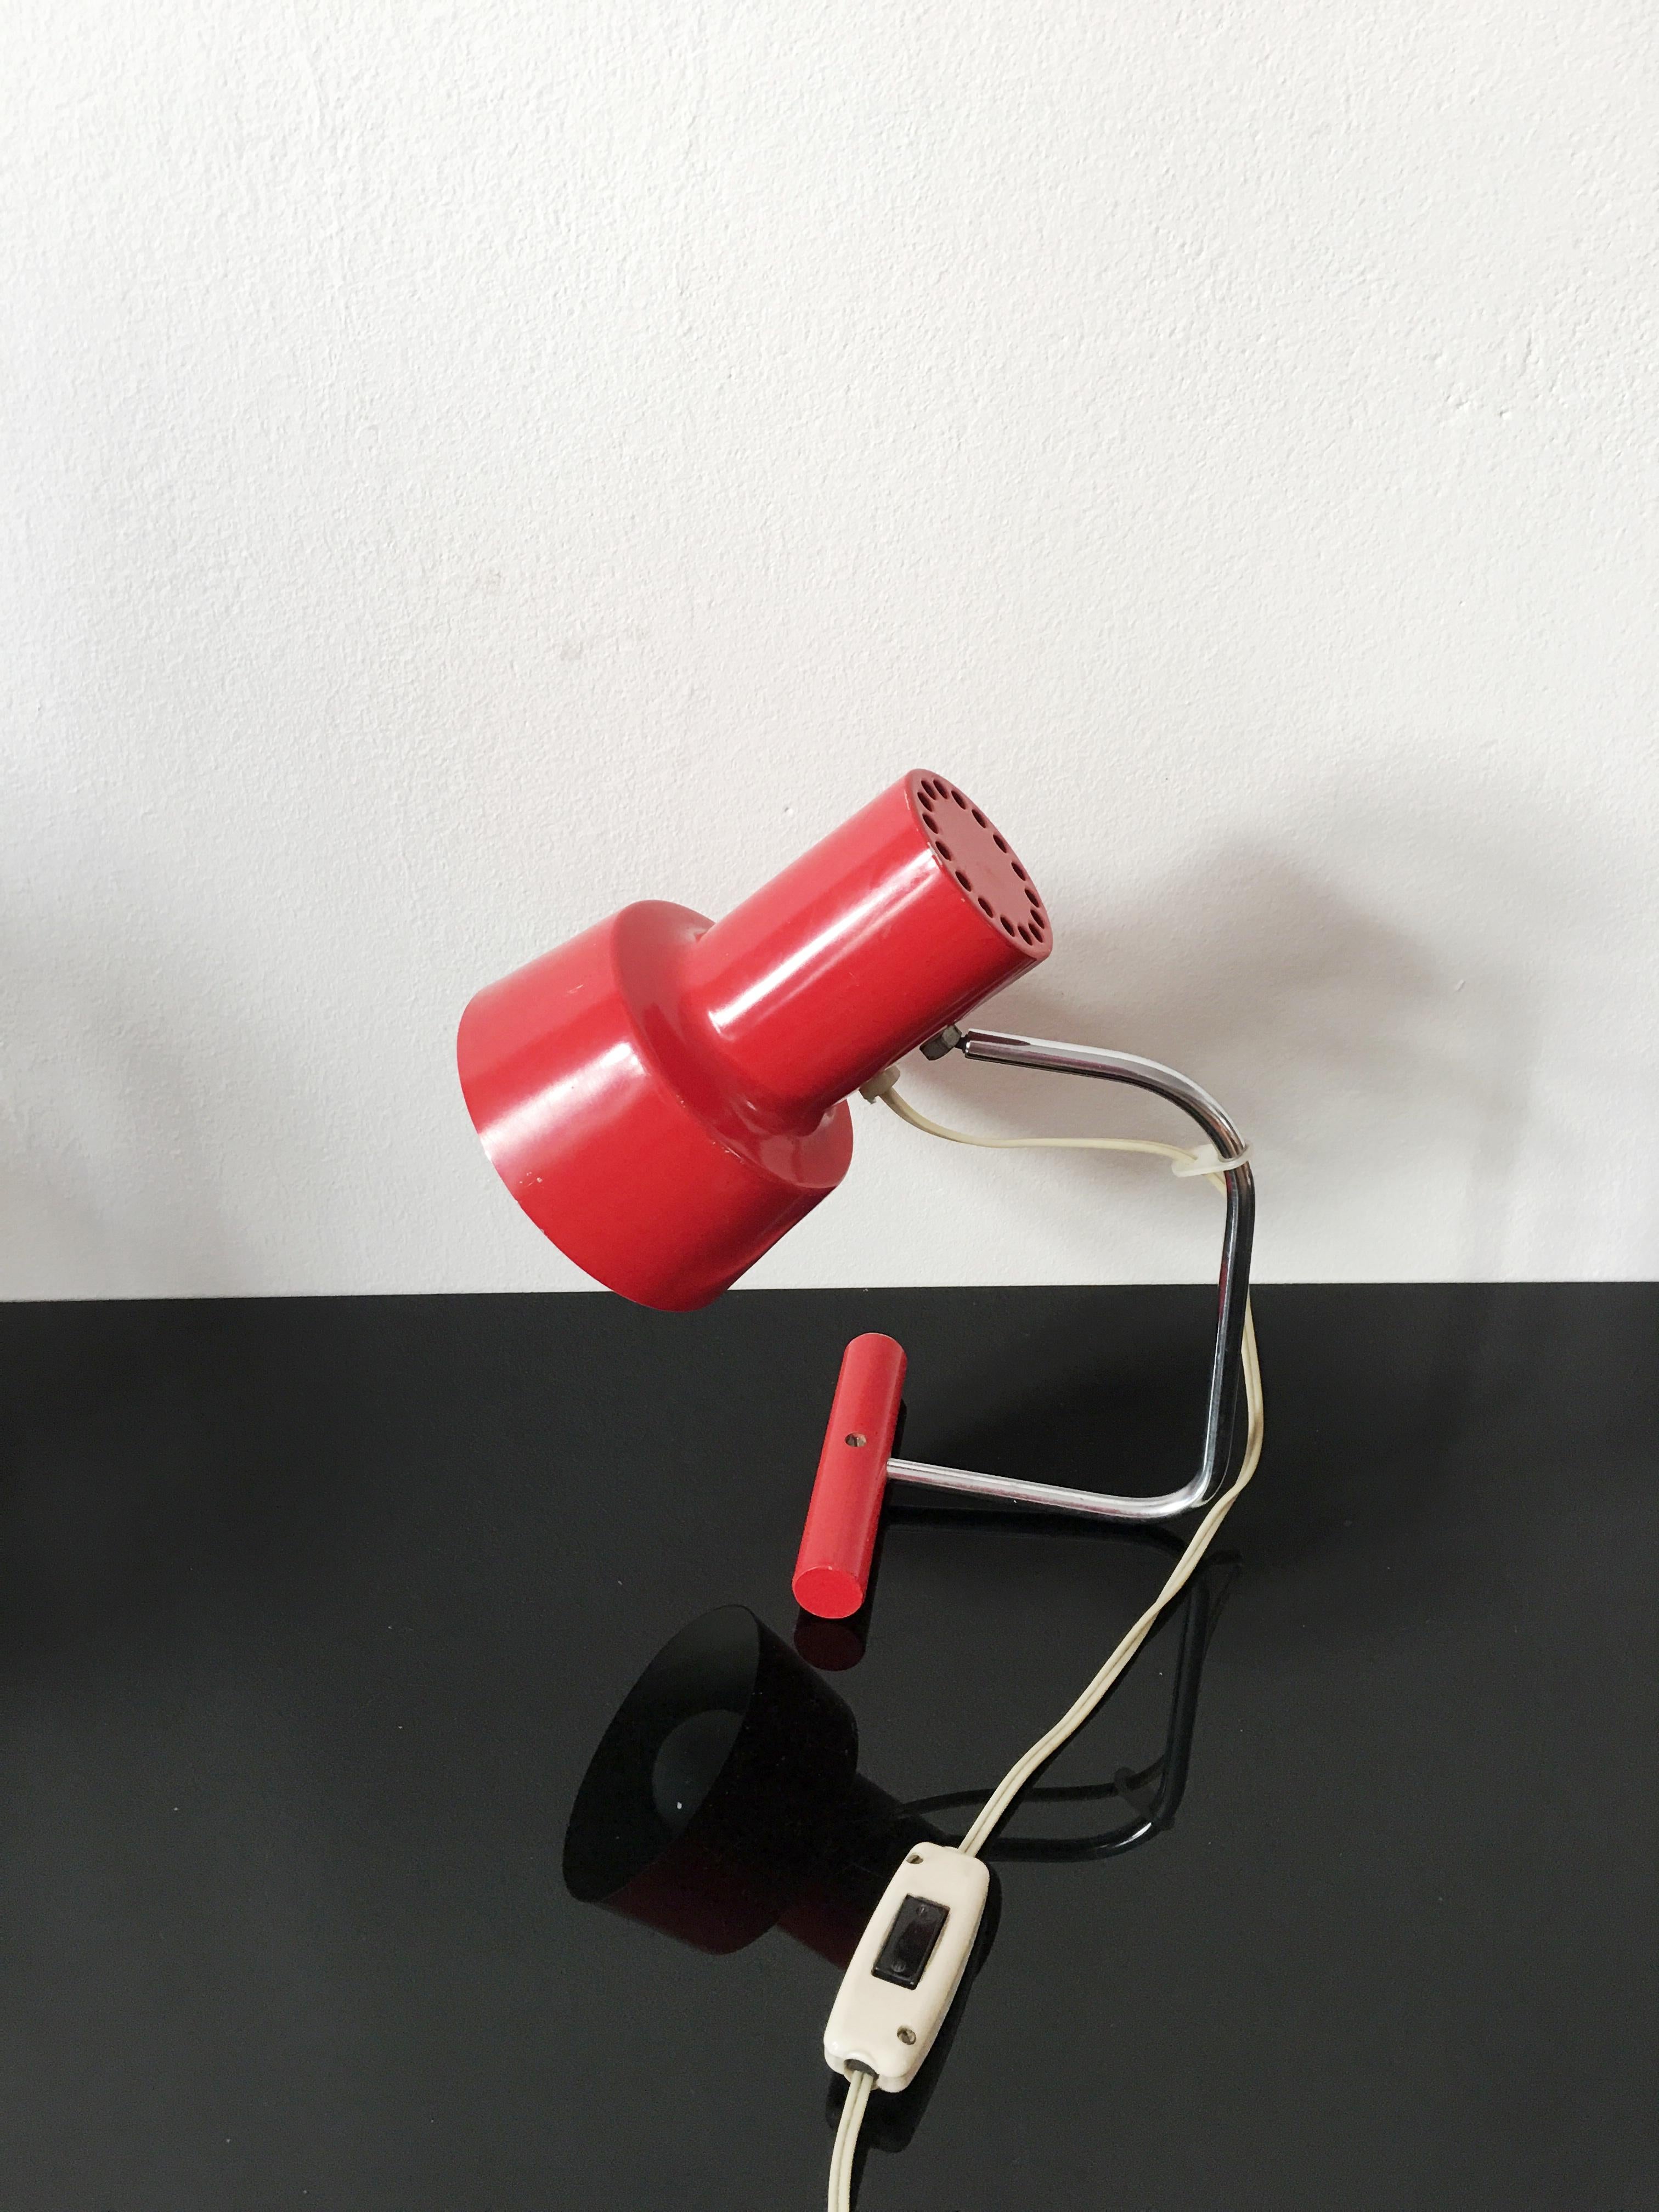 Designer Josef Hurka Lamp, red color.
From the 1960s in former Czechoslovakia, original vintage condition.
Measures: H 29cm x W 14cm x D 26cm.